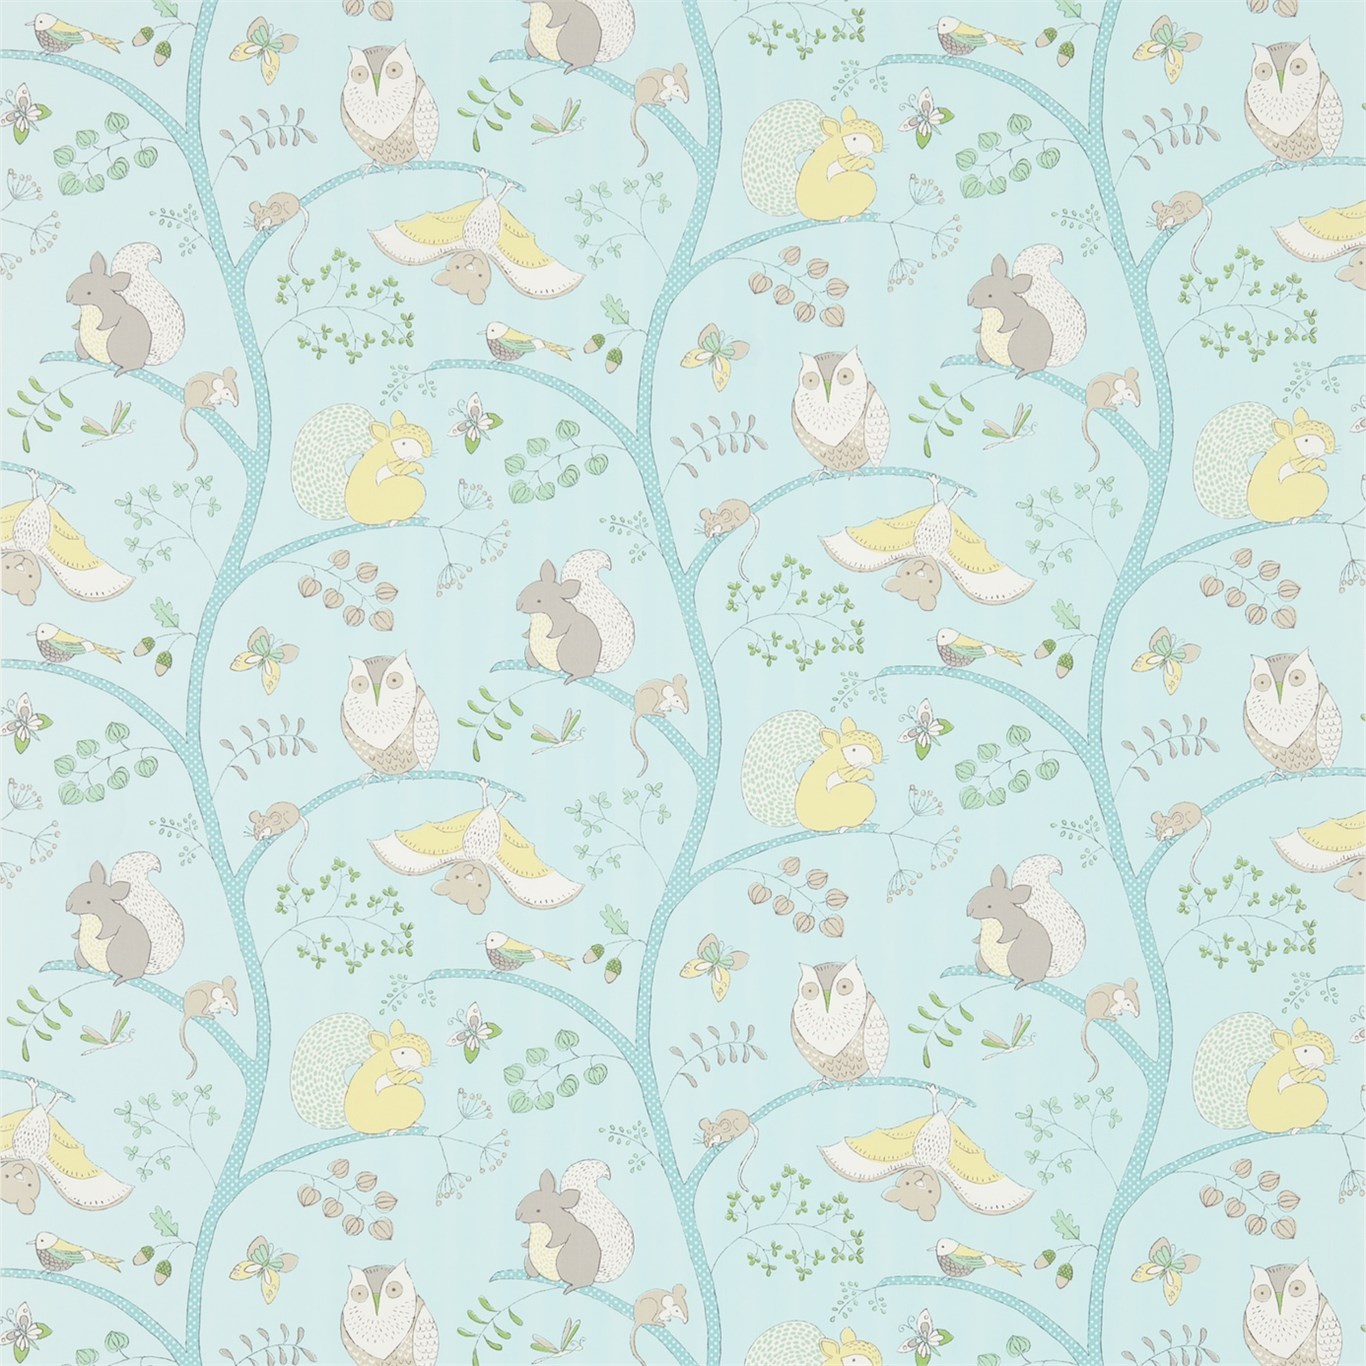 Going Batty Sky Blue/Buttercup Fabric by Sanderson